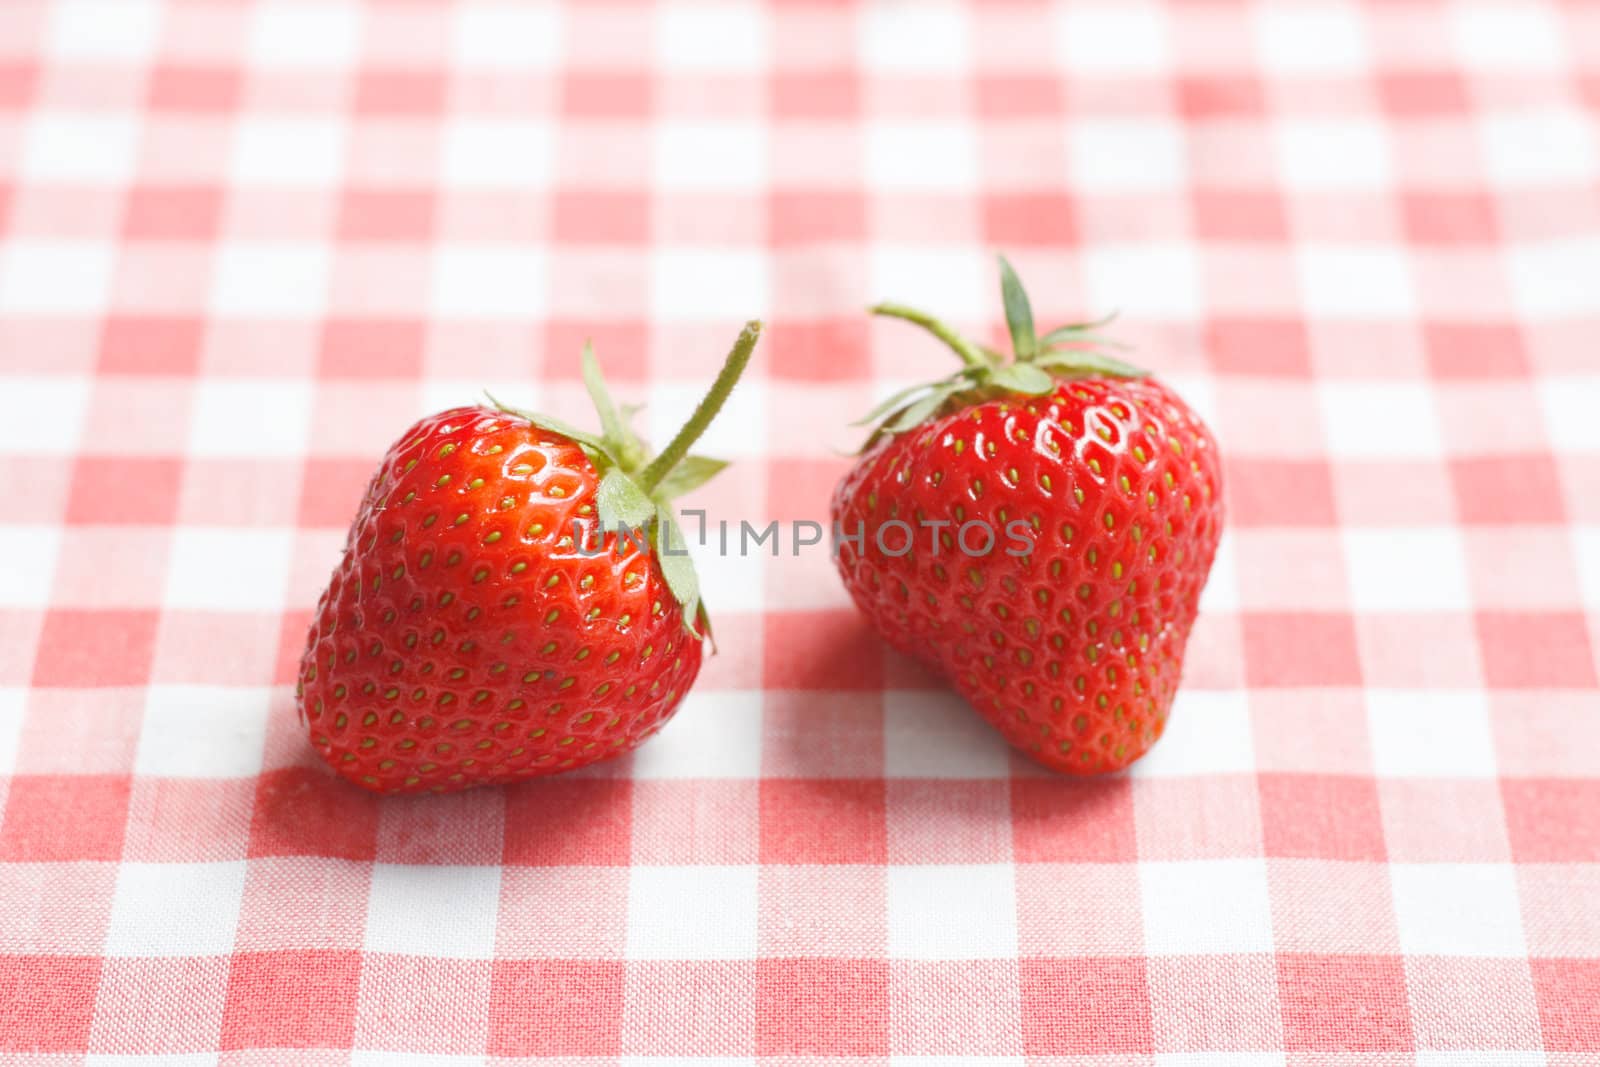 Strawberries on a table